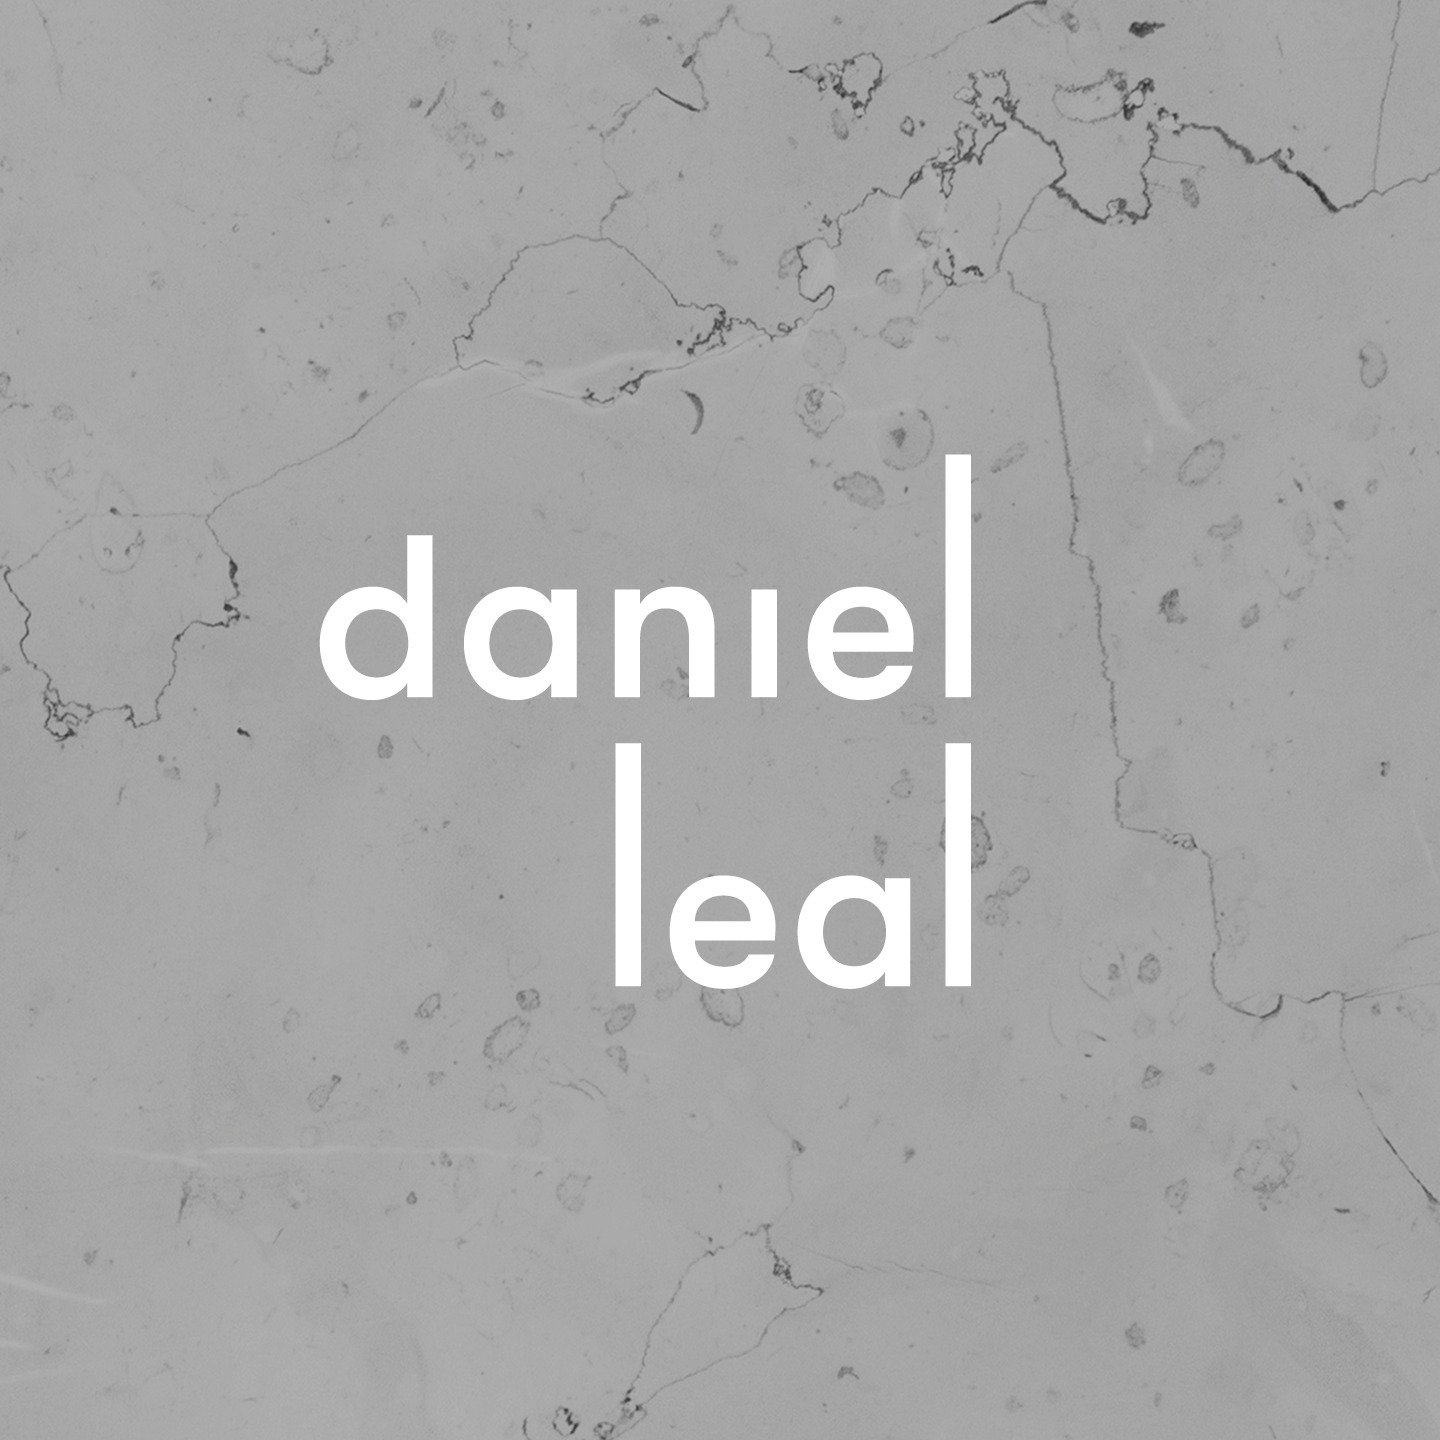 The Dr. Daniel Leal brand specializes in internal medicine, with a strong focus on functional medicine. Functional medicine is considered an emerging model in the treatment of chronic diseases, seeking to address the patient in a holistic and innovat